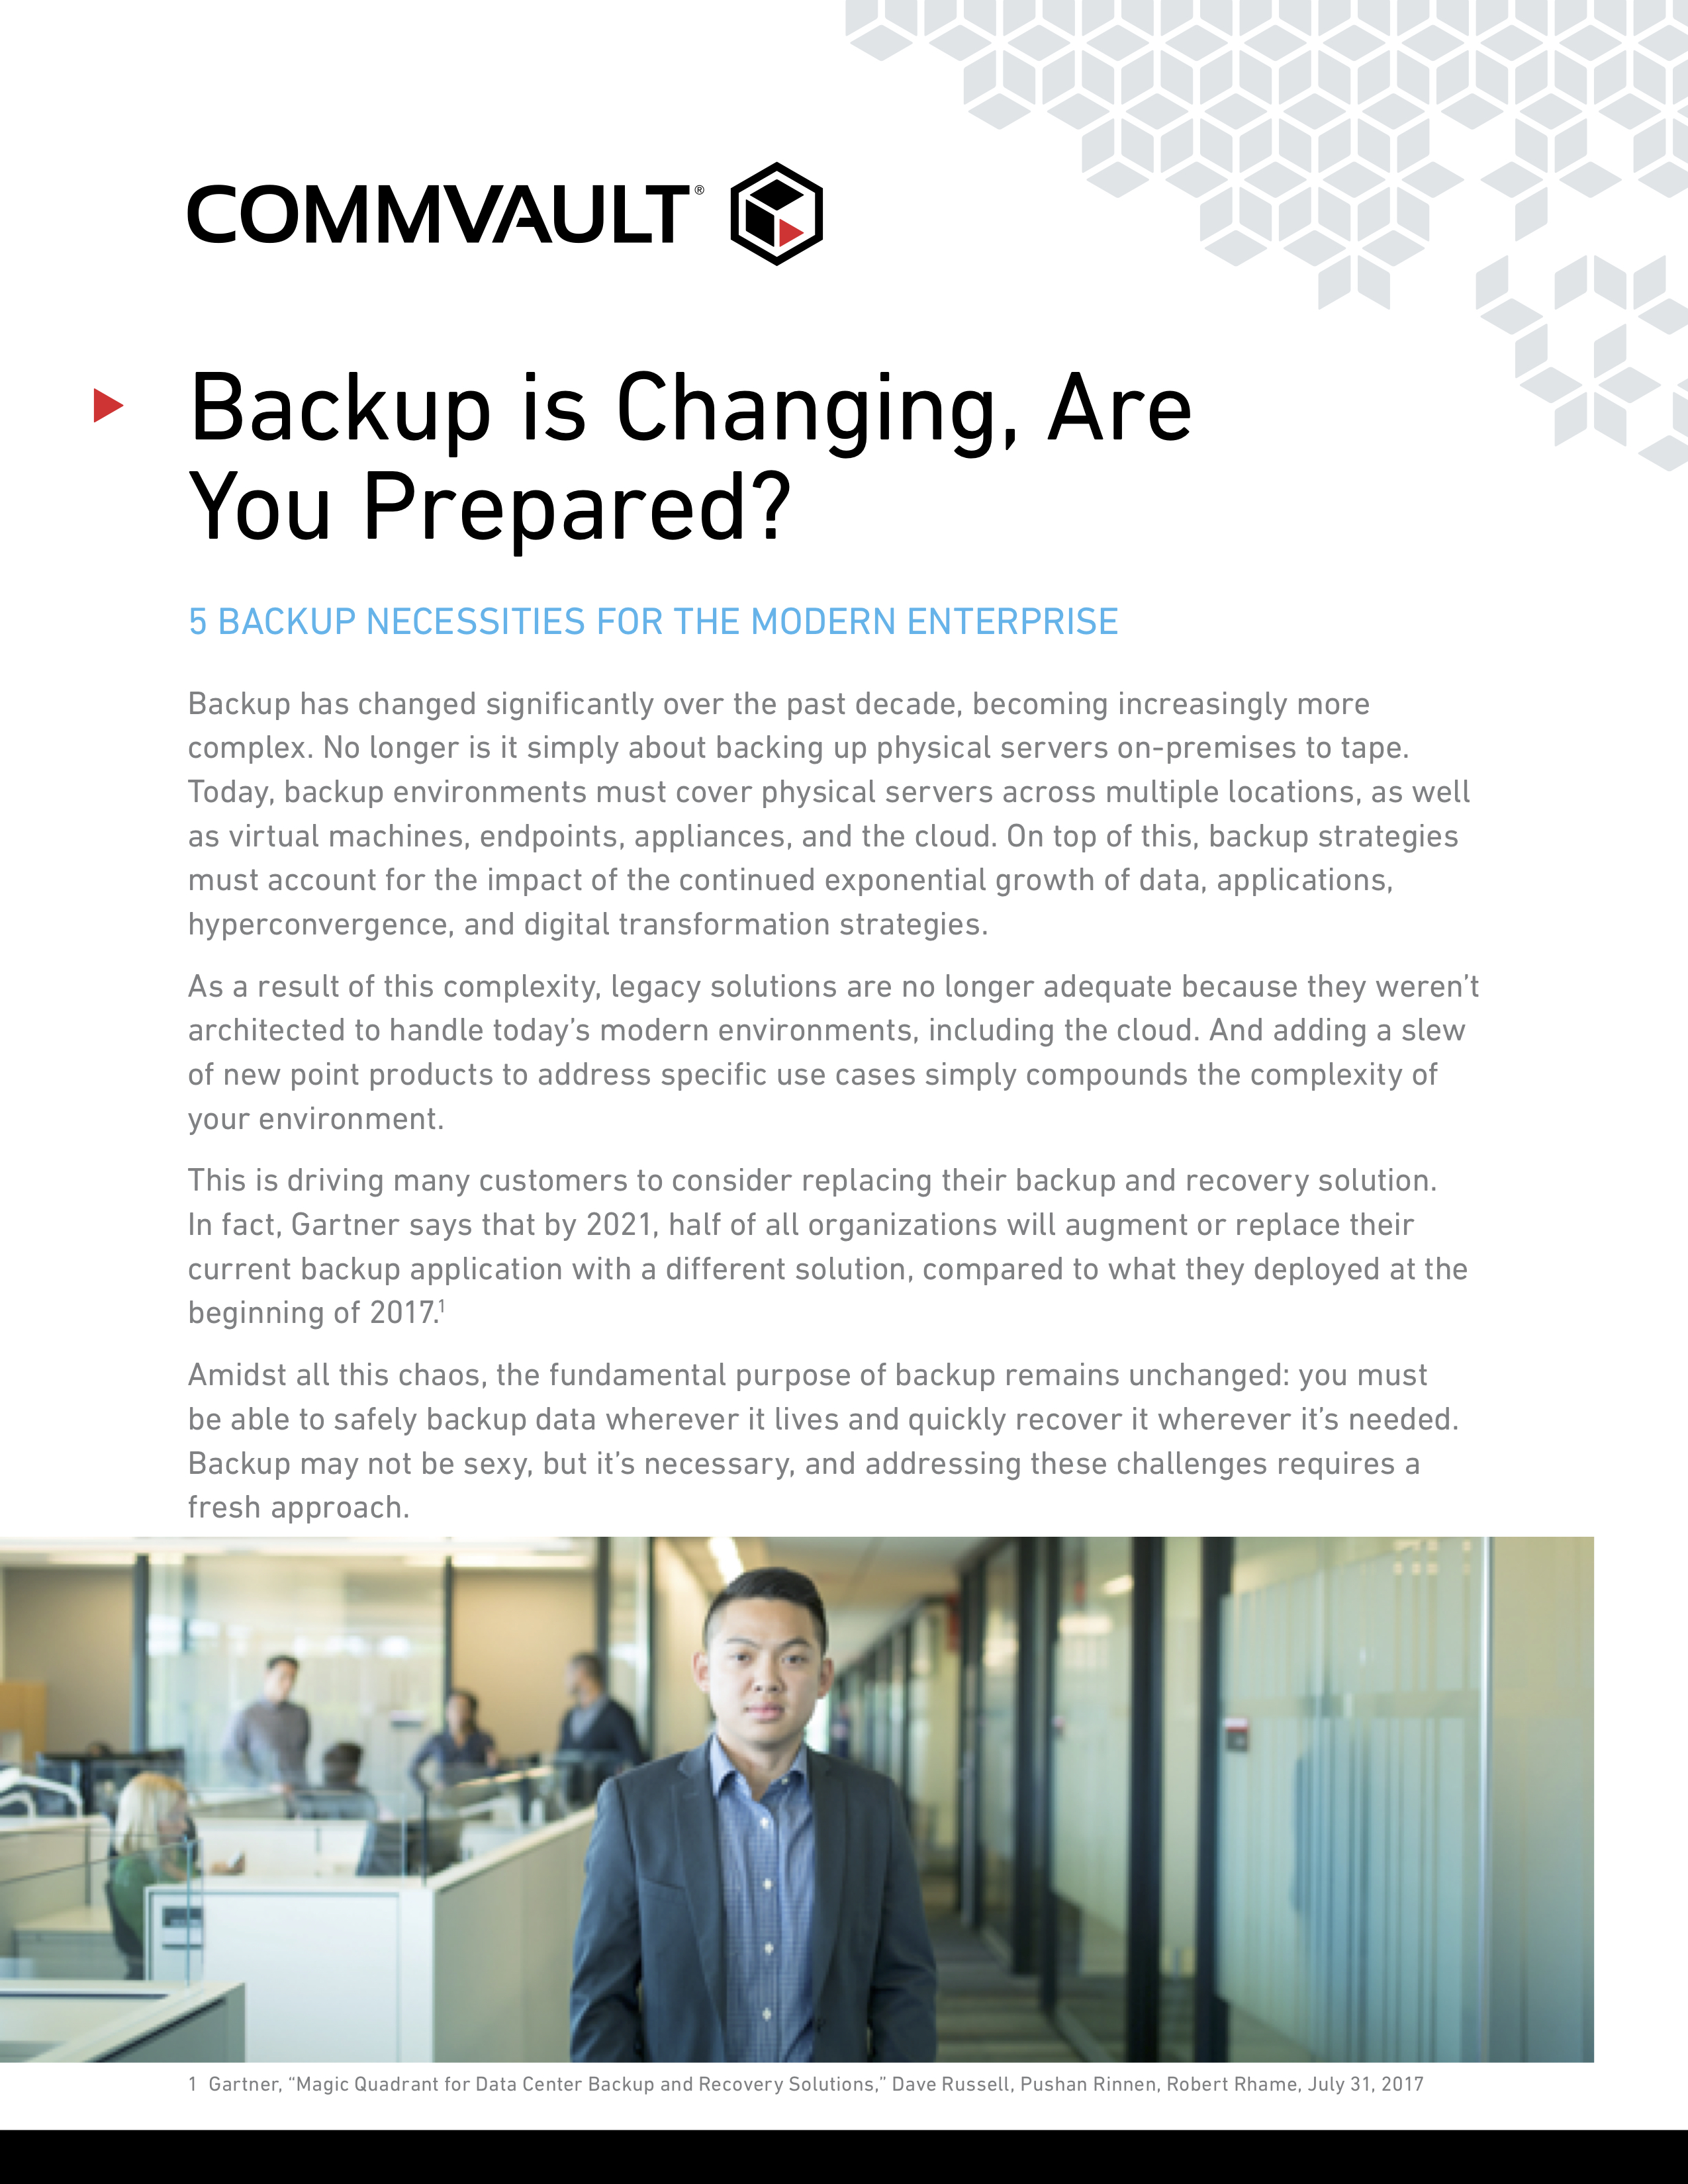 Backup is Changing - Are You Prepared?